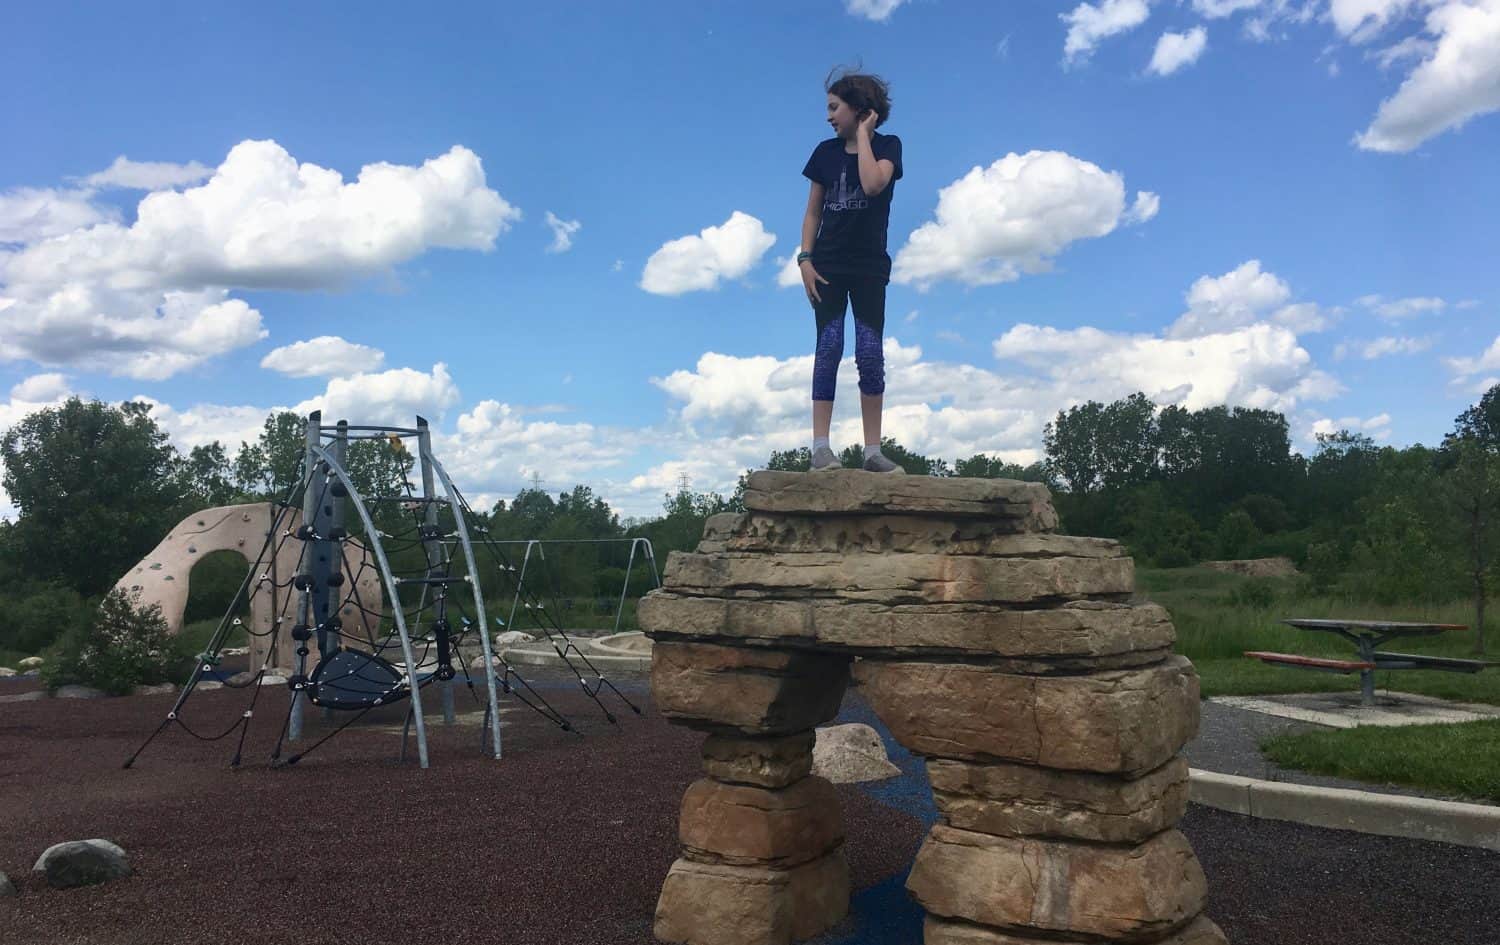 Olson Park Playground Profile - Queen of the Mountain